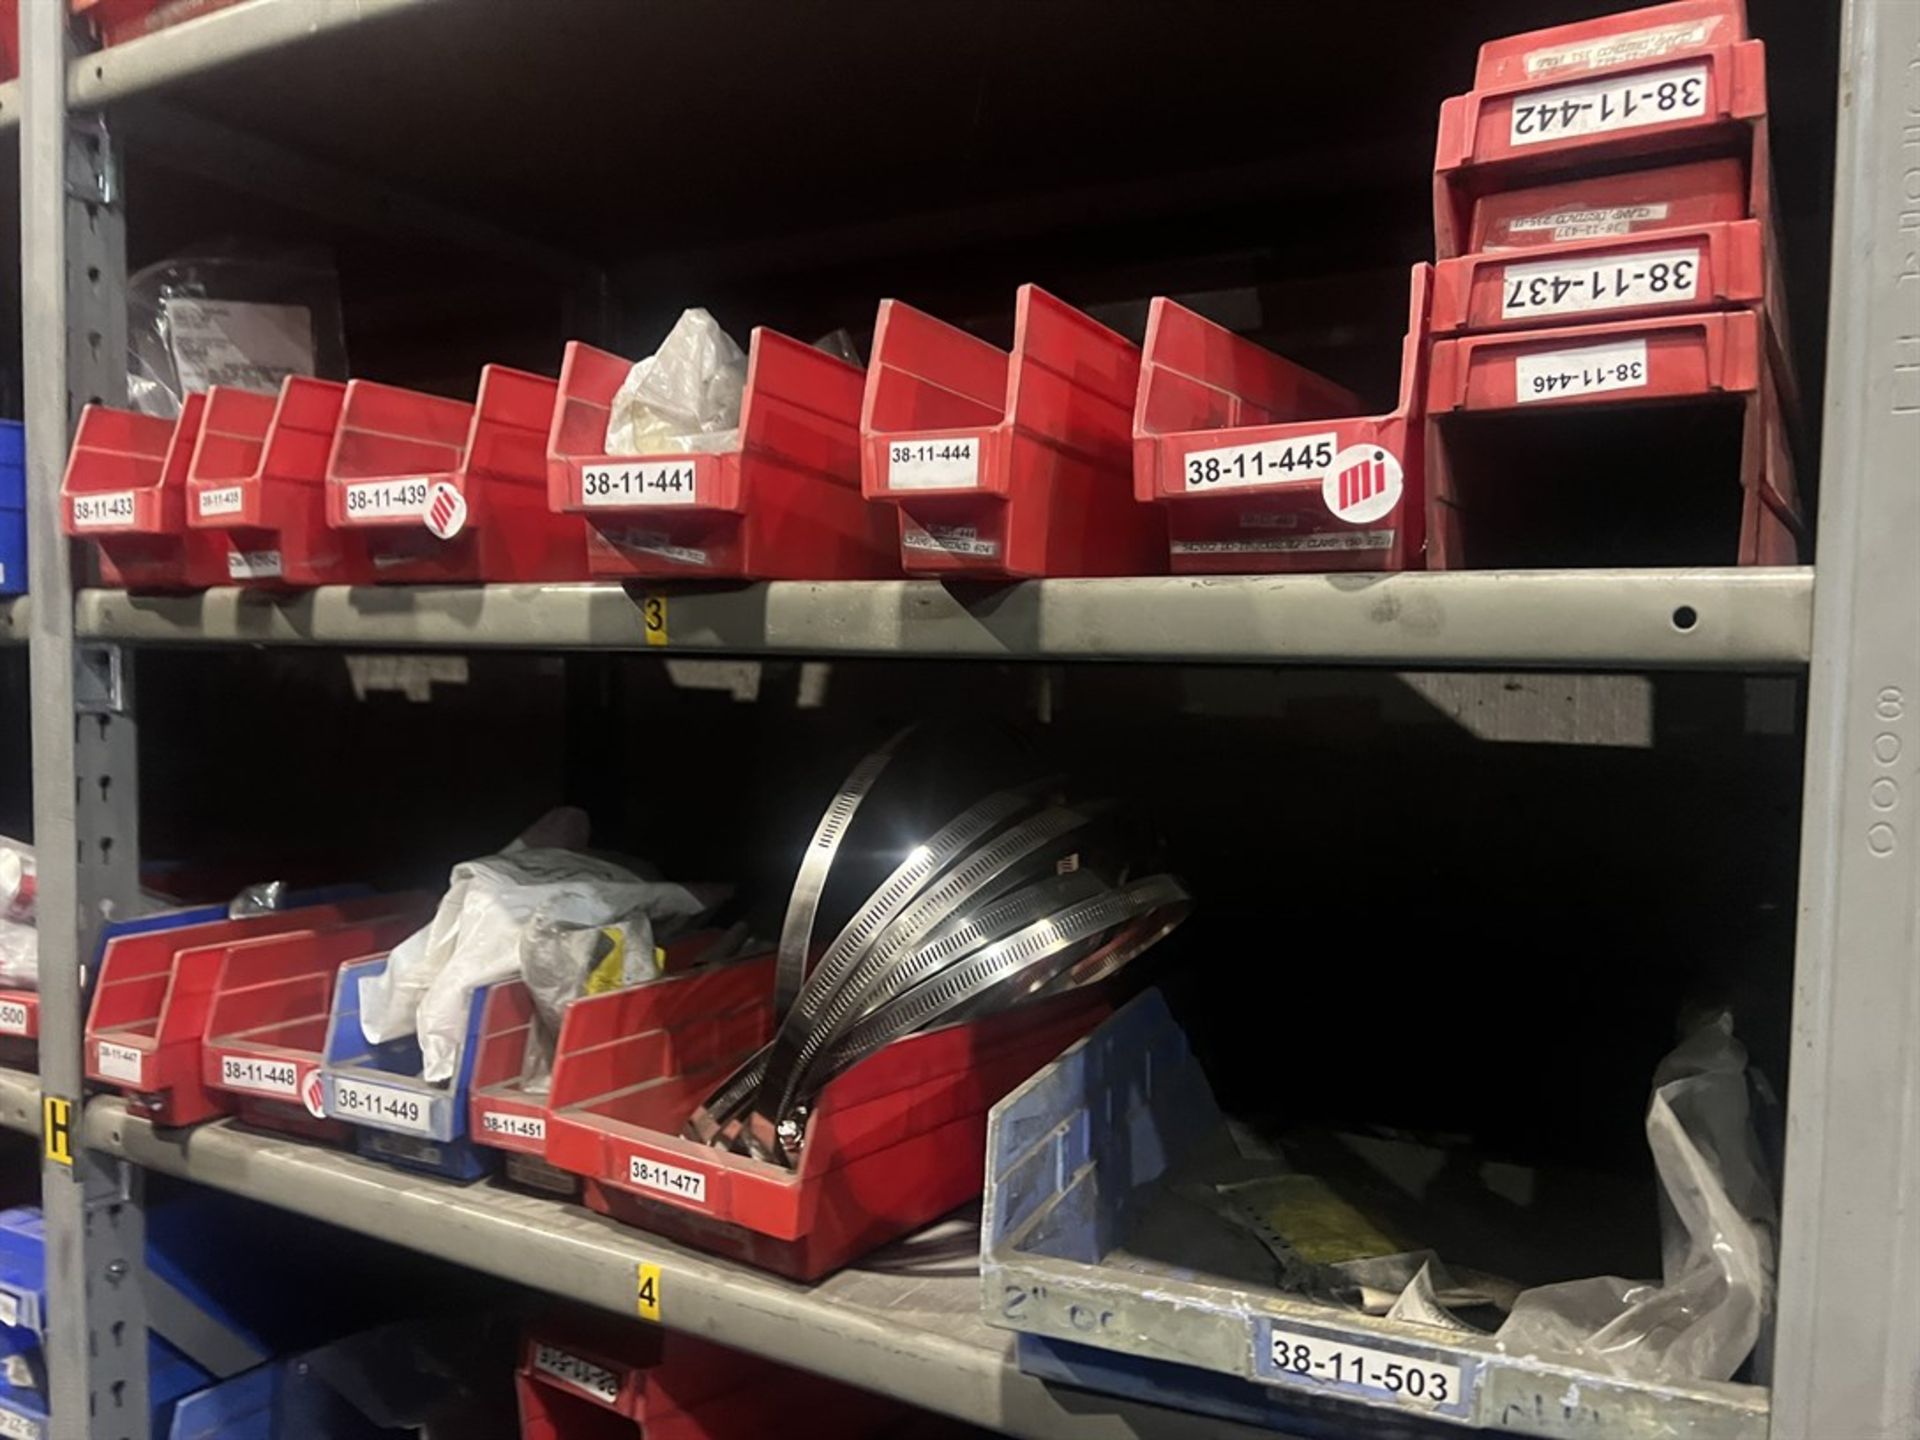 Lot Comprising (11) Shop Shelving Units w/ Contents Including Assorted PPE, Hardware, Chain - Image 7 of 12